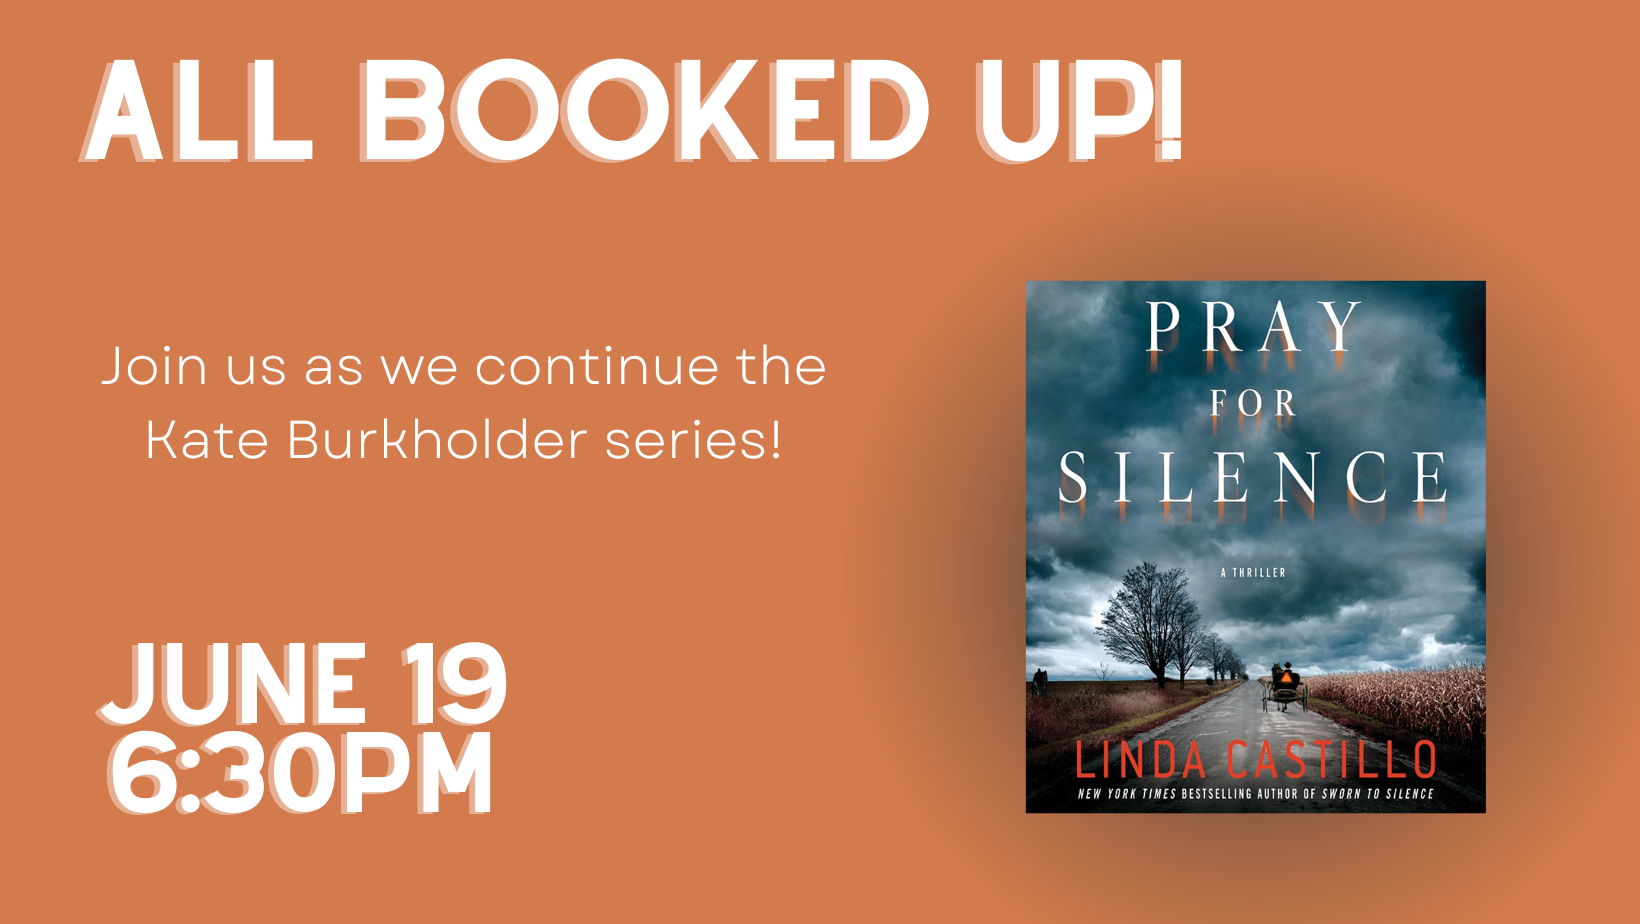 All Booked Up will be reading 'Pray for Silence' by Linda Castillo for our June meeting.